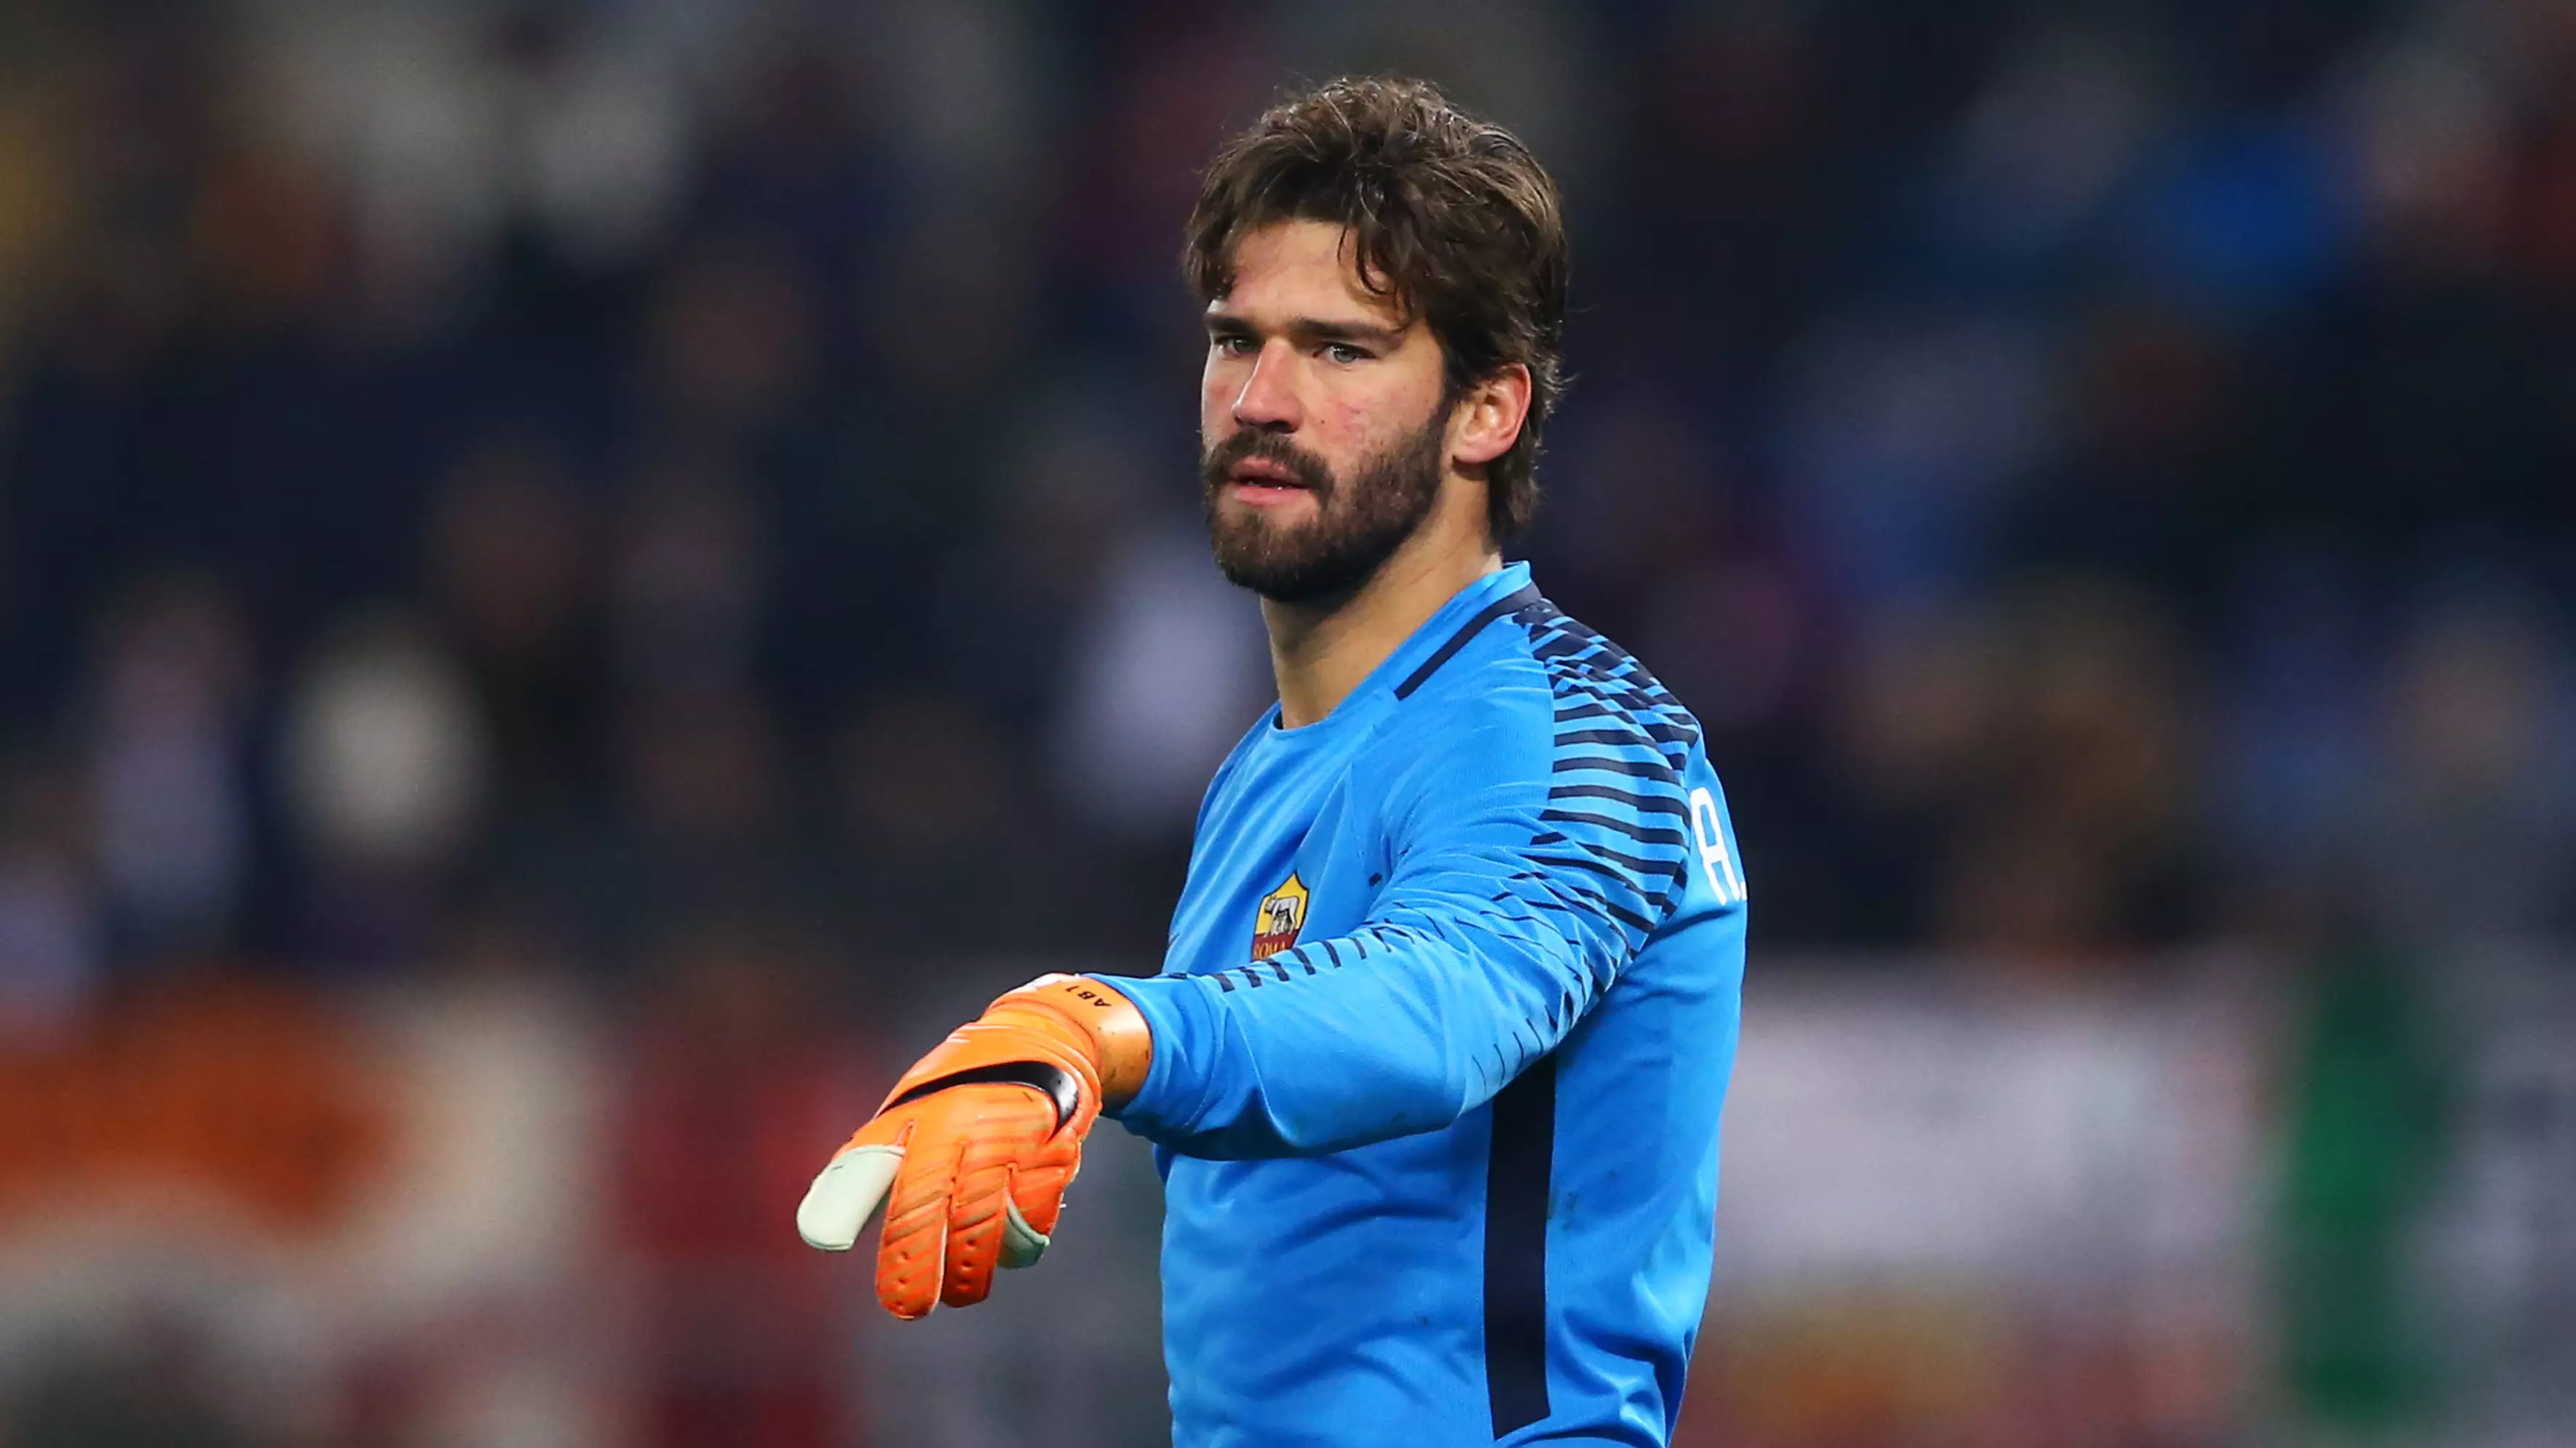 Alisson is getting rave reviews in Italy this season. Image: PA Iamges